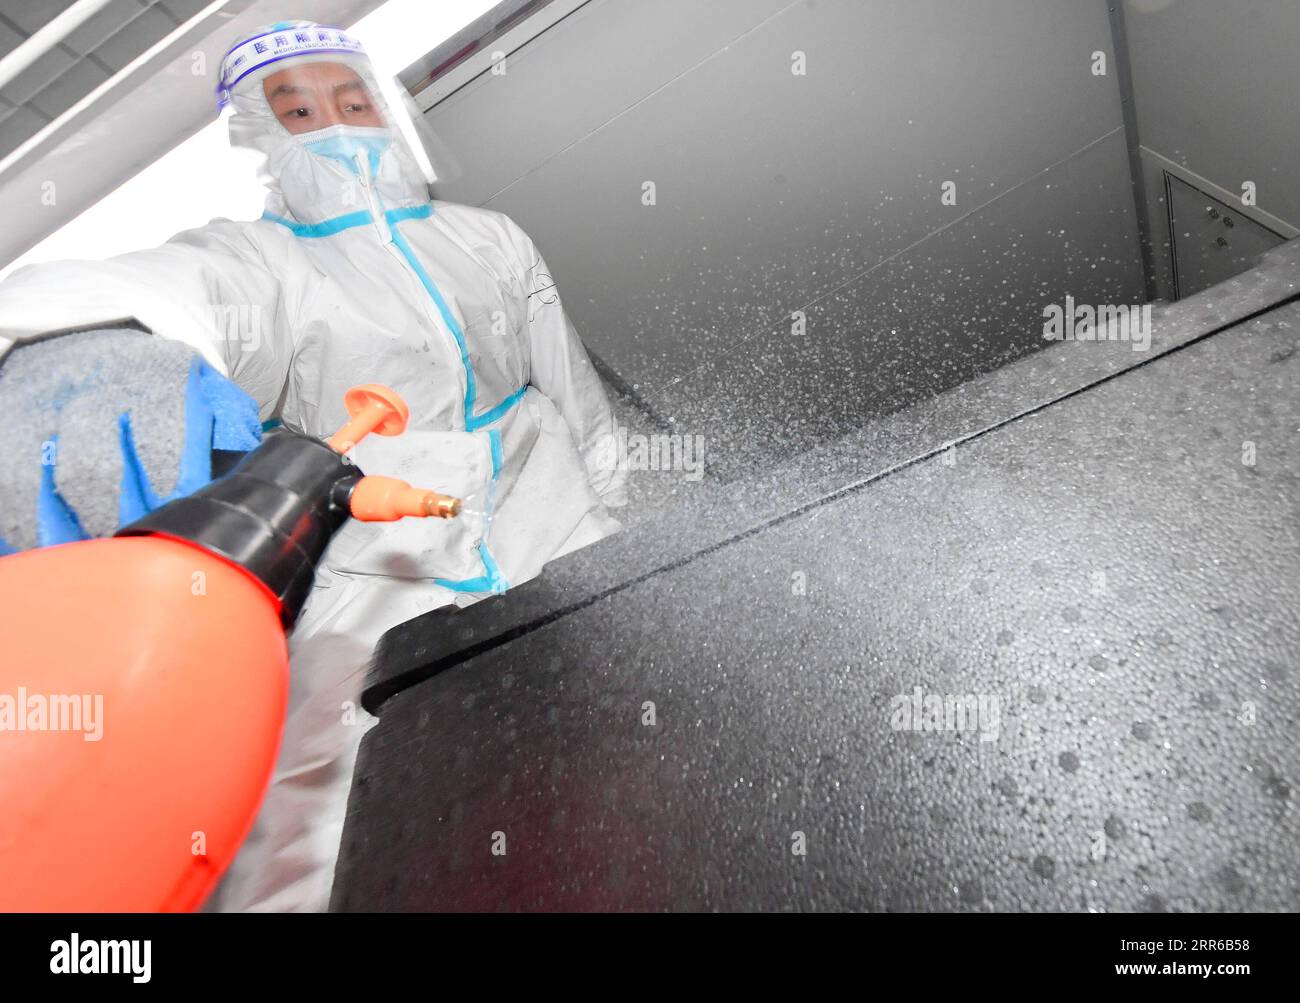 210203 -- TONGHUA, Feb. 3, 2021 -- A worker disinfects a transportable container for boxed meals in Tonghua City of northeast China s Jilin Province, Jan. 21, 2021. The city is slowing down to curb the pandemic, but we re not closing up. Instead, we re busier than ever, said Zhao Hongxia, general manager of Jiahe Catering Company. The company was originally a boxed meal supplier for primary and secondary schools in Tonghua City. Since the COVID-19 outbreak in Tonghua, the company has accepted a new task of providing meals to front-line staff and people under quarantine. More than 30,000 boxes Stock Photo